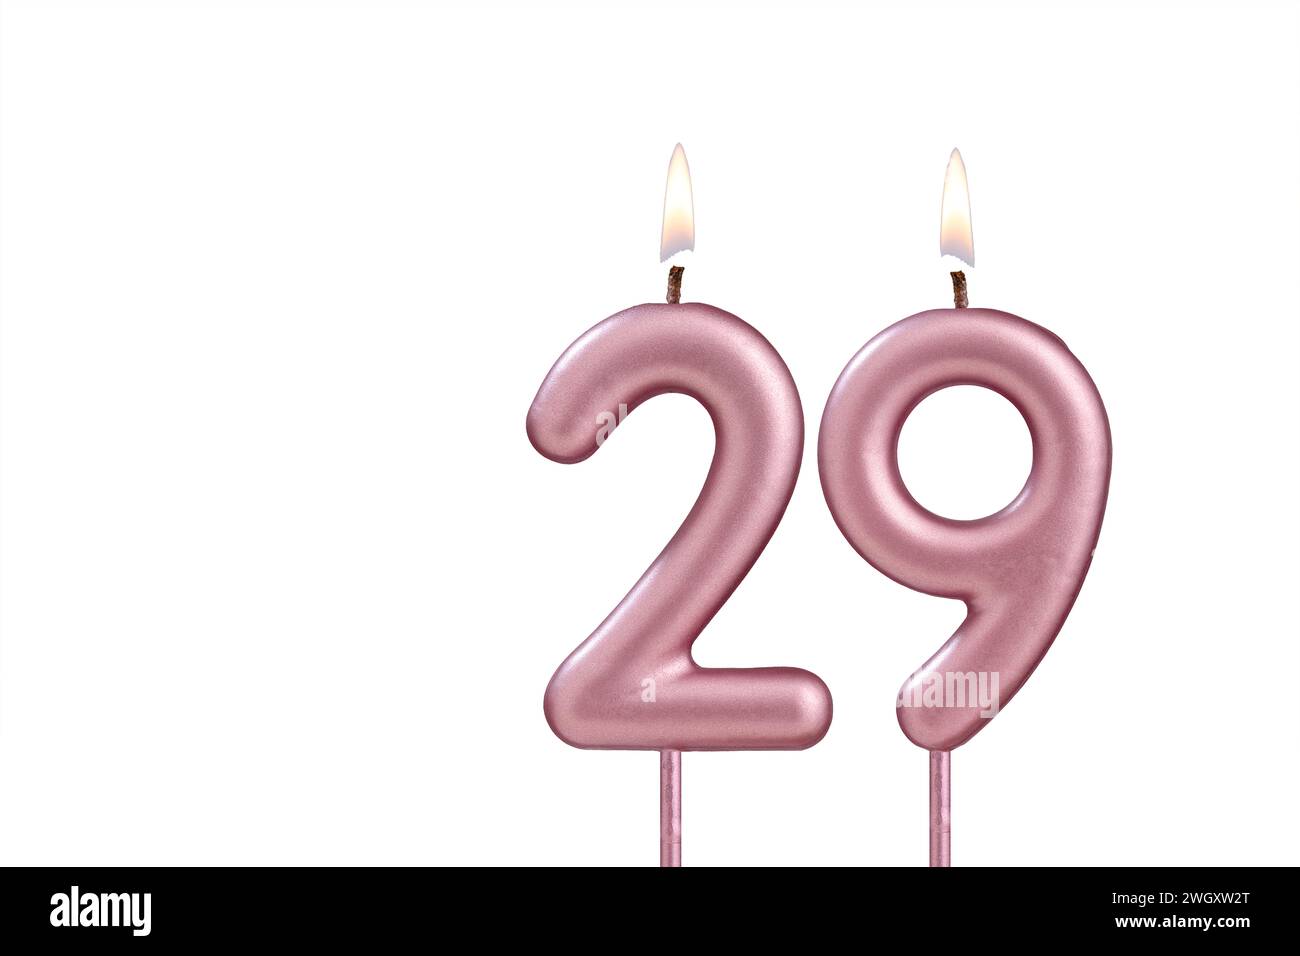 Candle number 29 - Lit birthday candle on white background Stock Photo